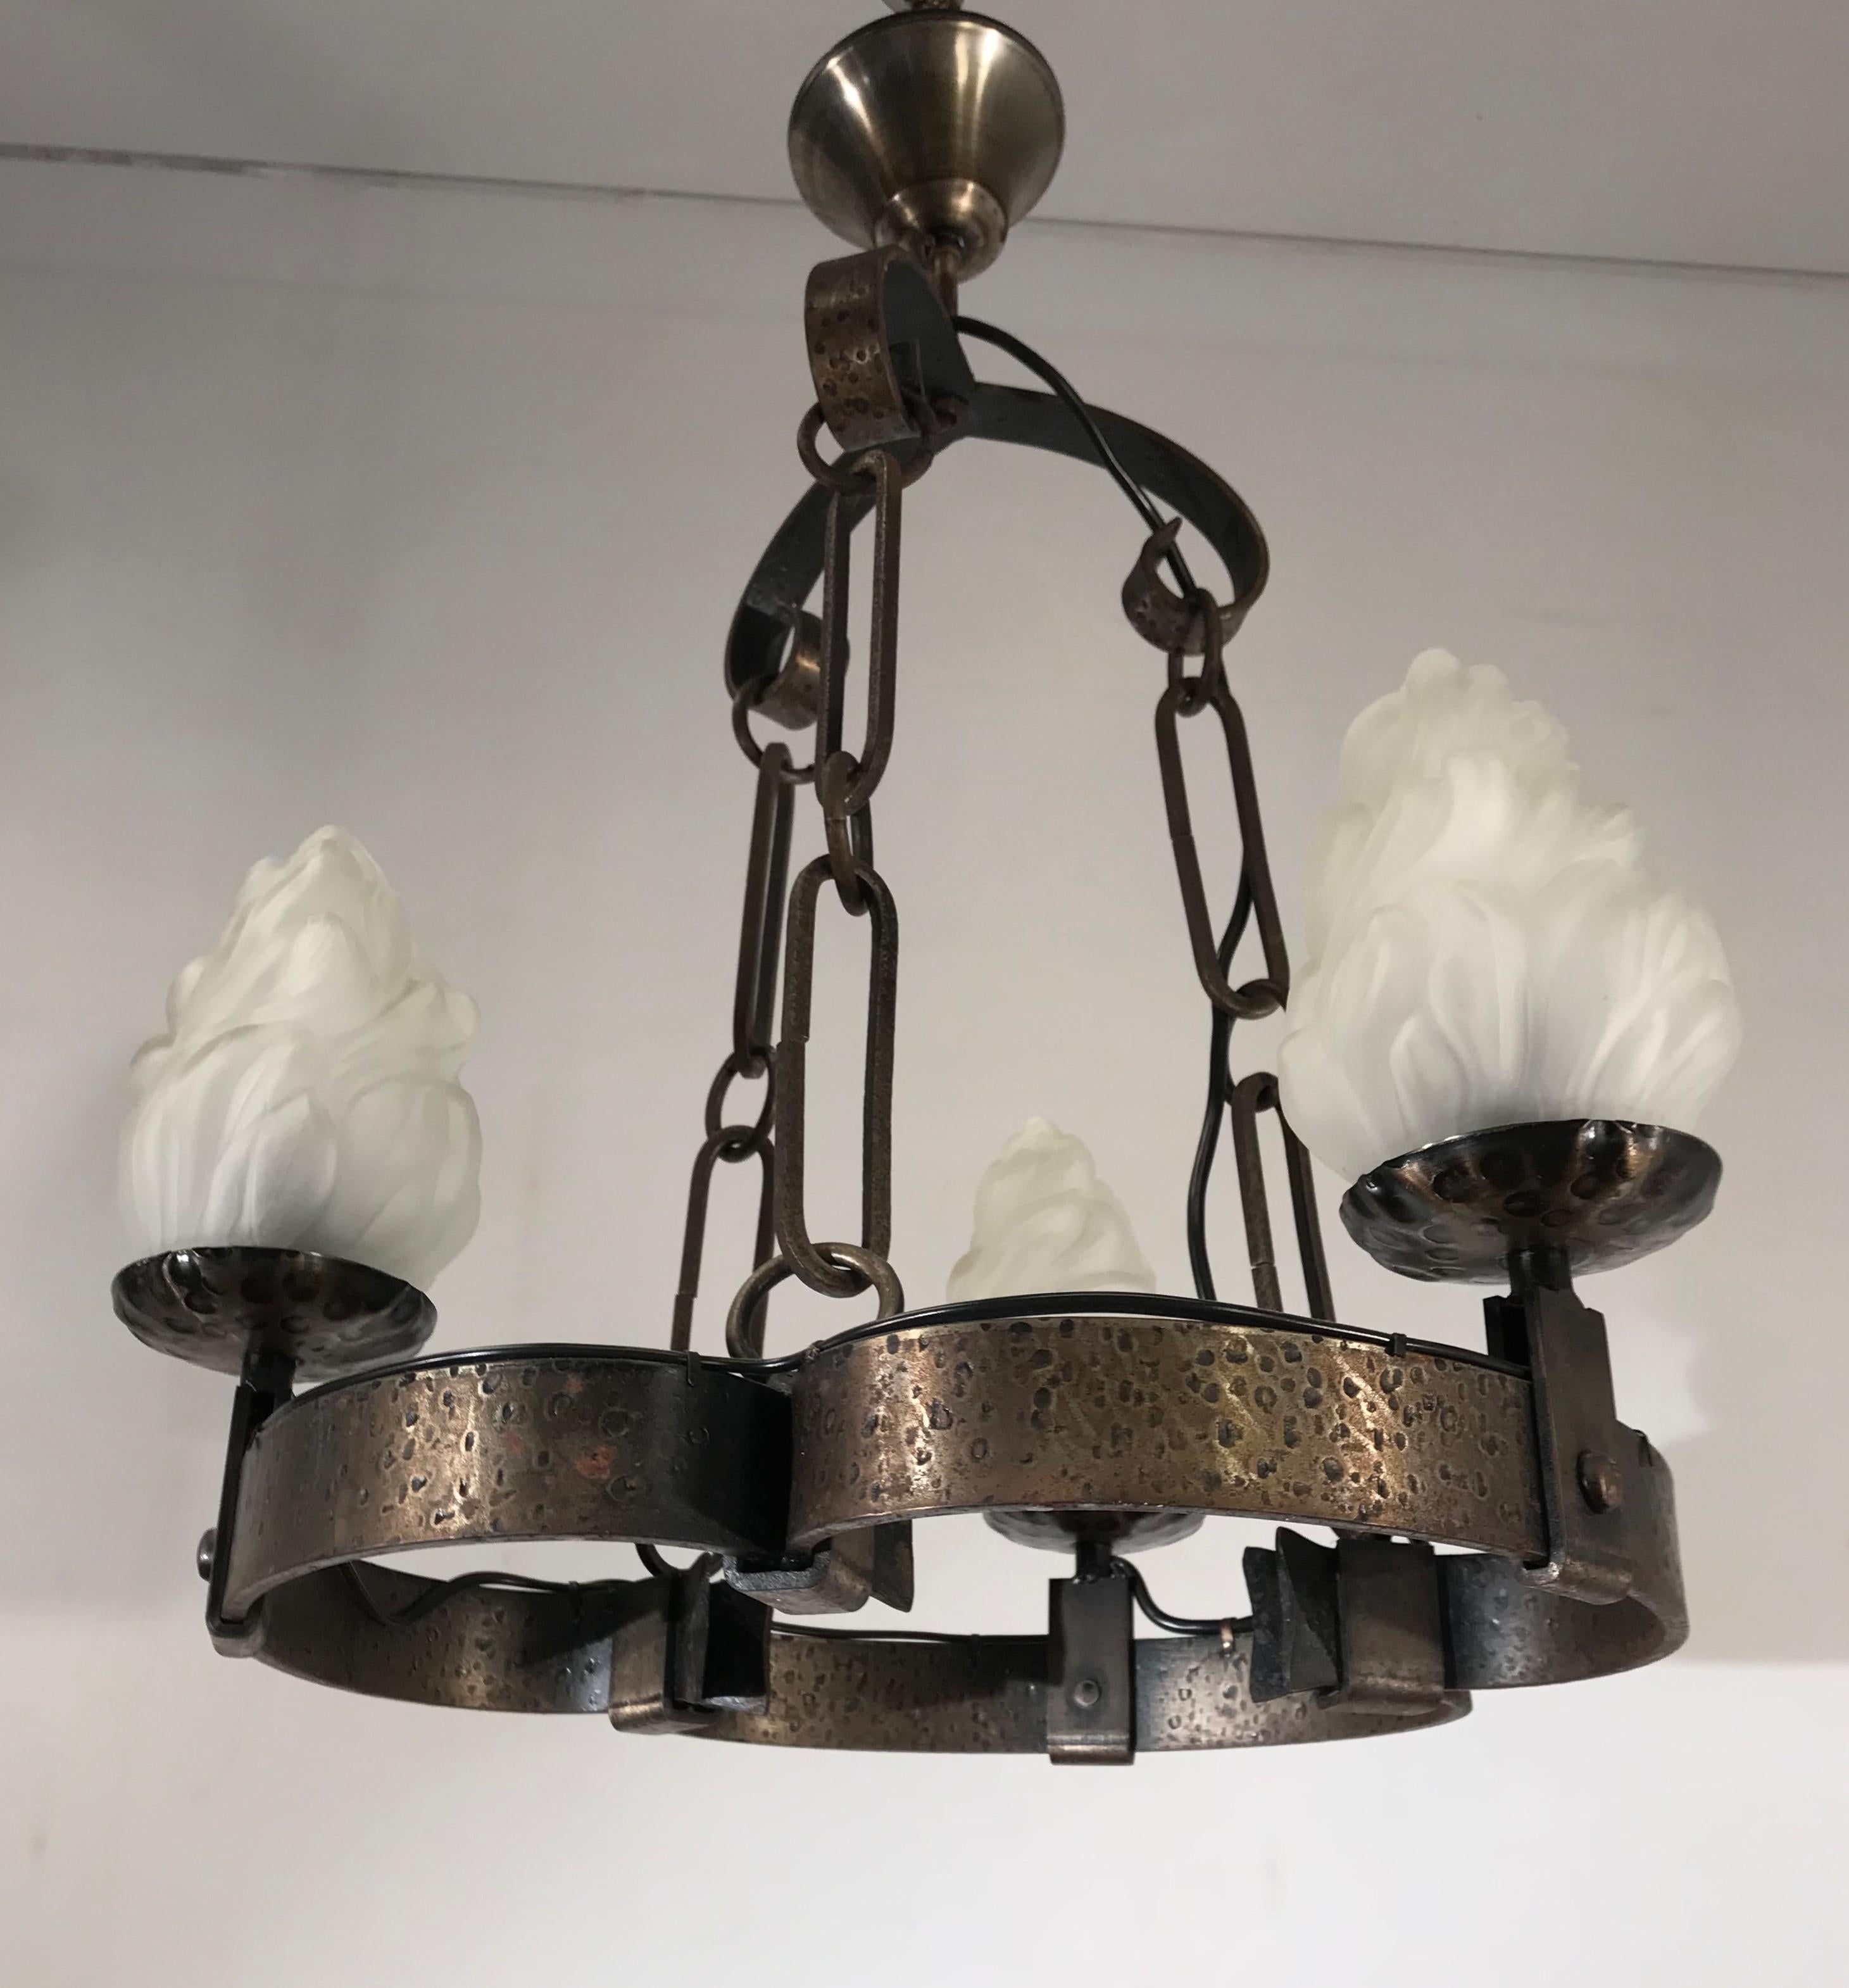 20th Century Arts & Crafts Hand-Hammered Wrought Iron Castle or Wine Cellar Pendant Light For Sale